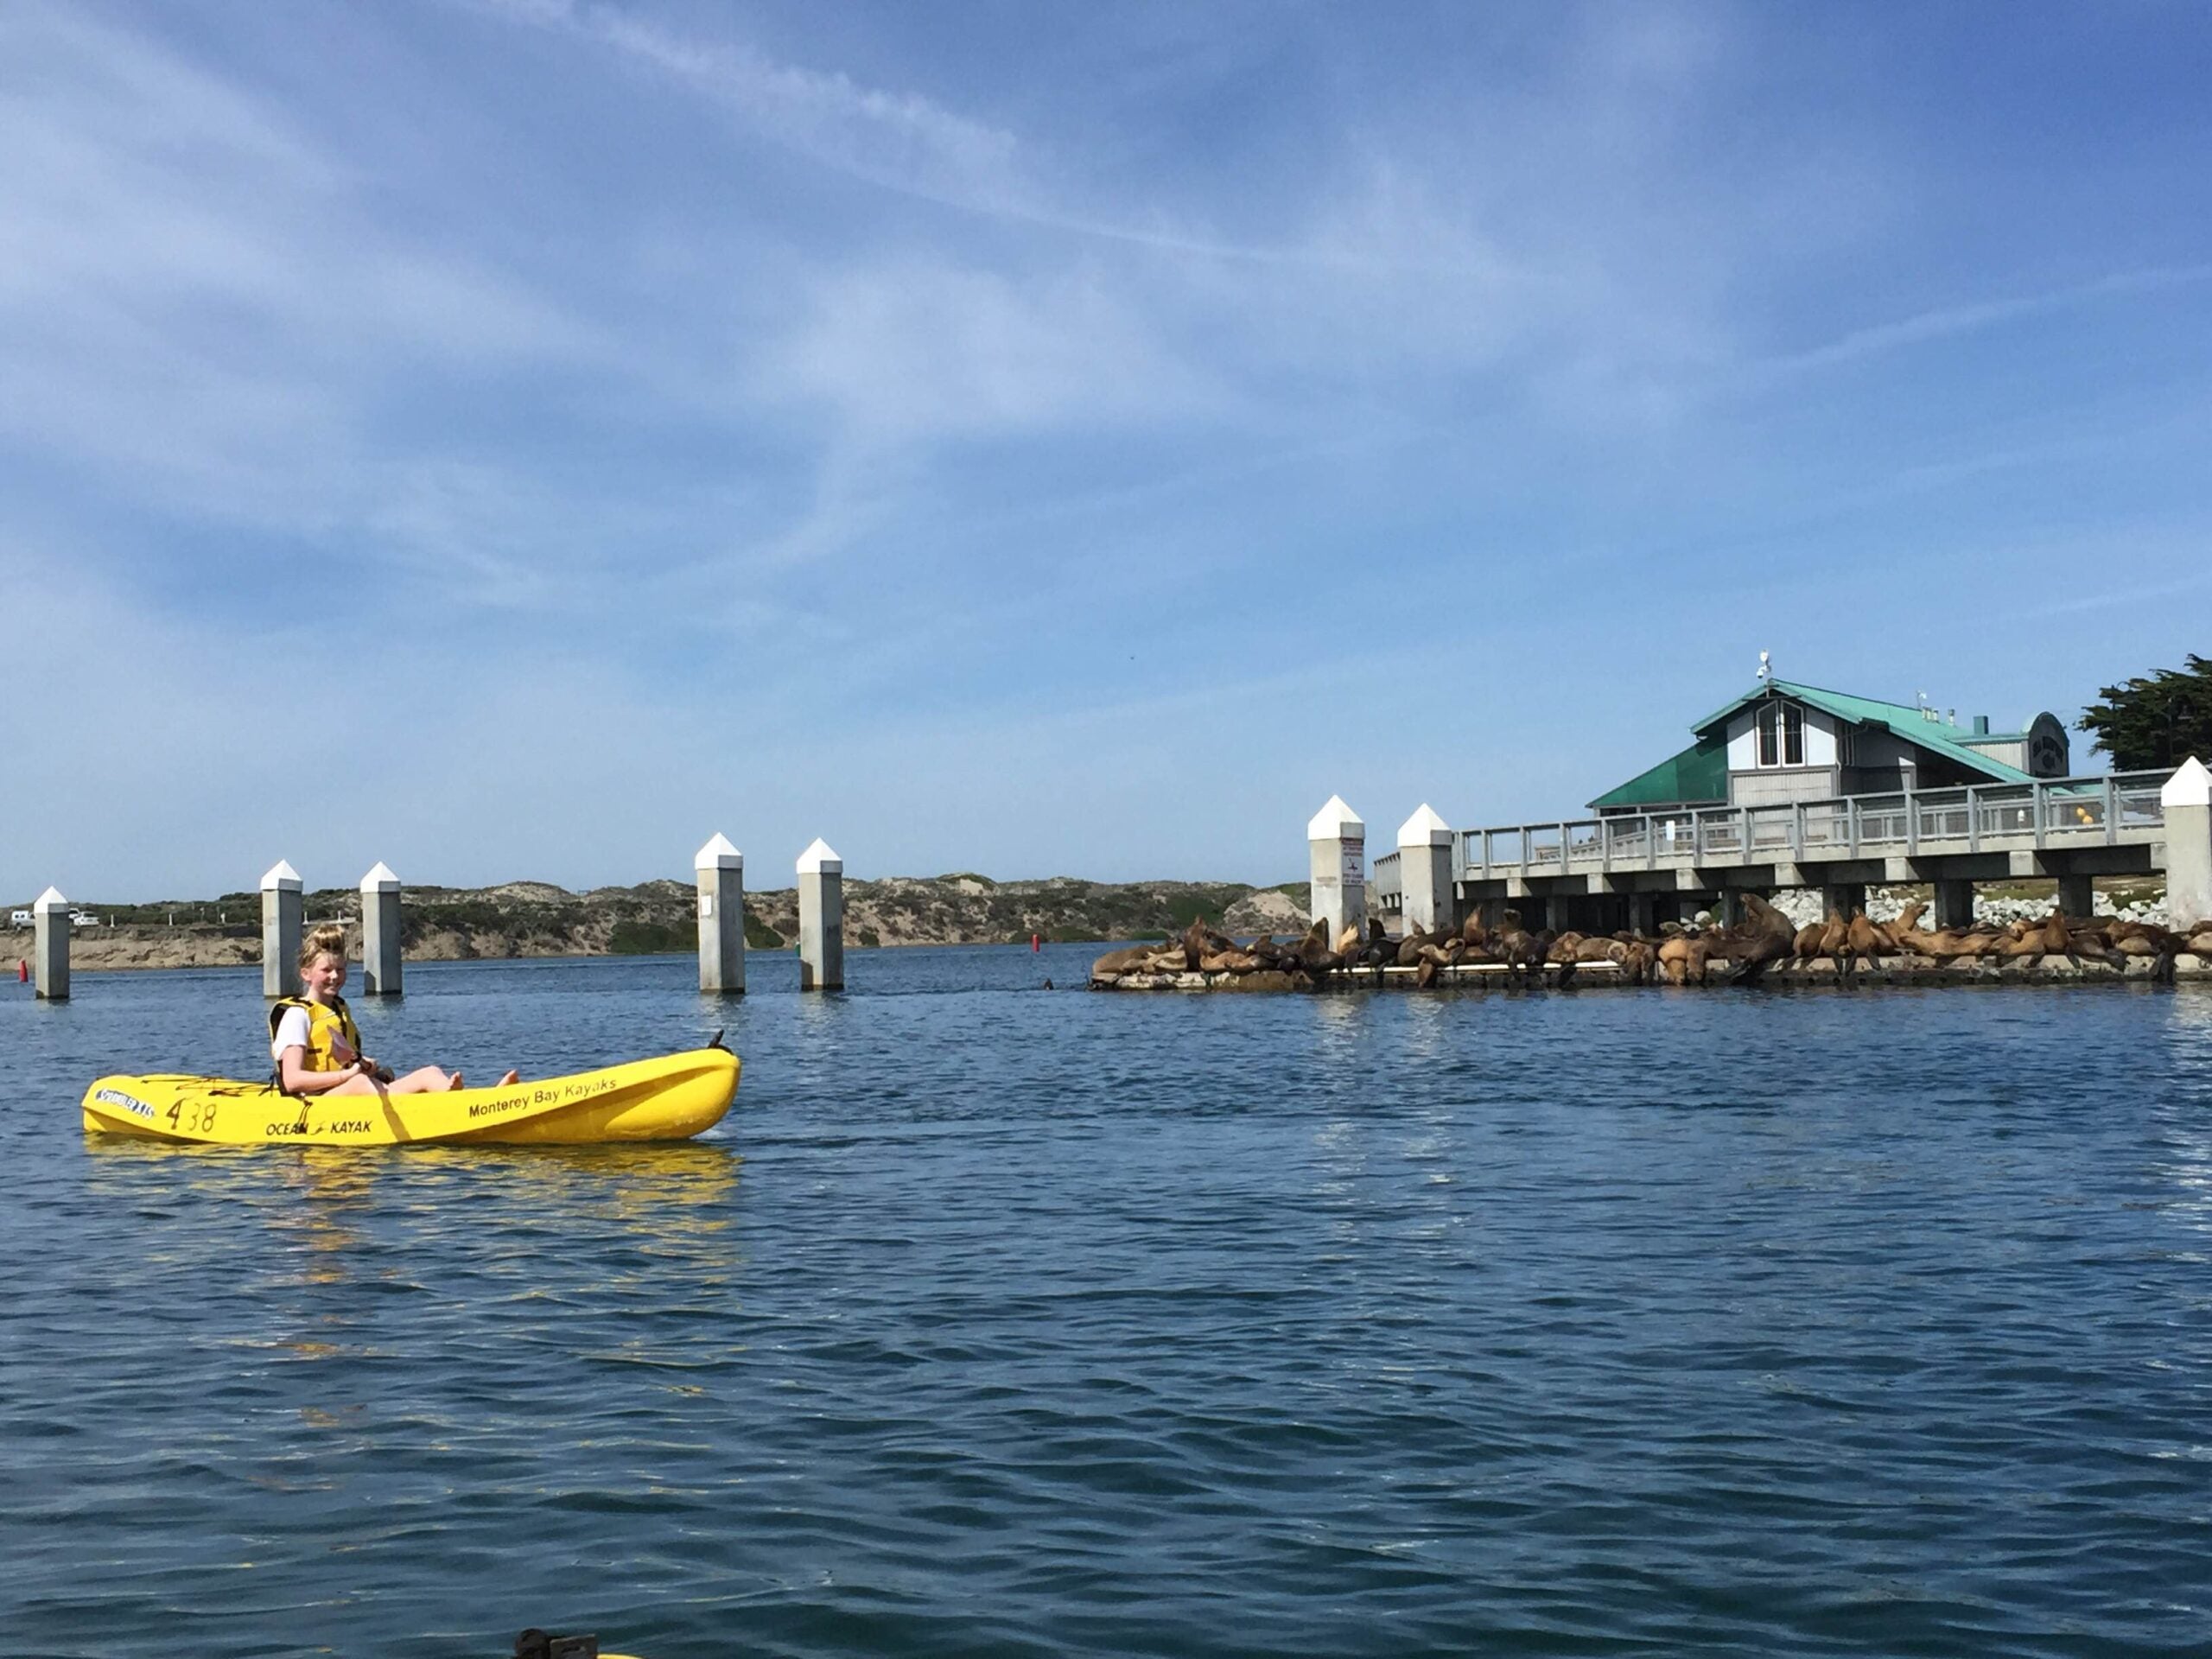 Stacey Geis&#039; daughter kayaking in Elkhorn Slough, located on the Monterey Bay coastline.